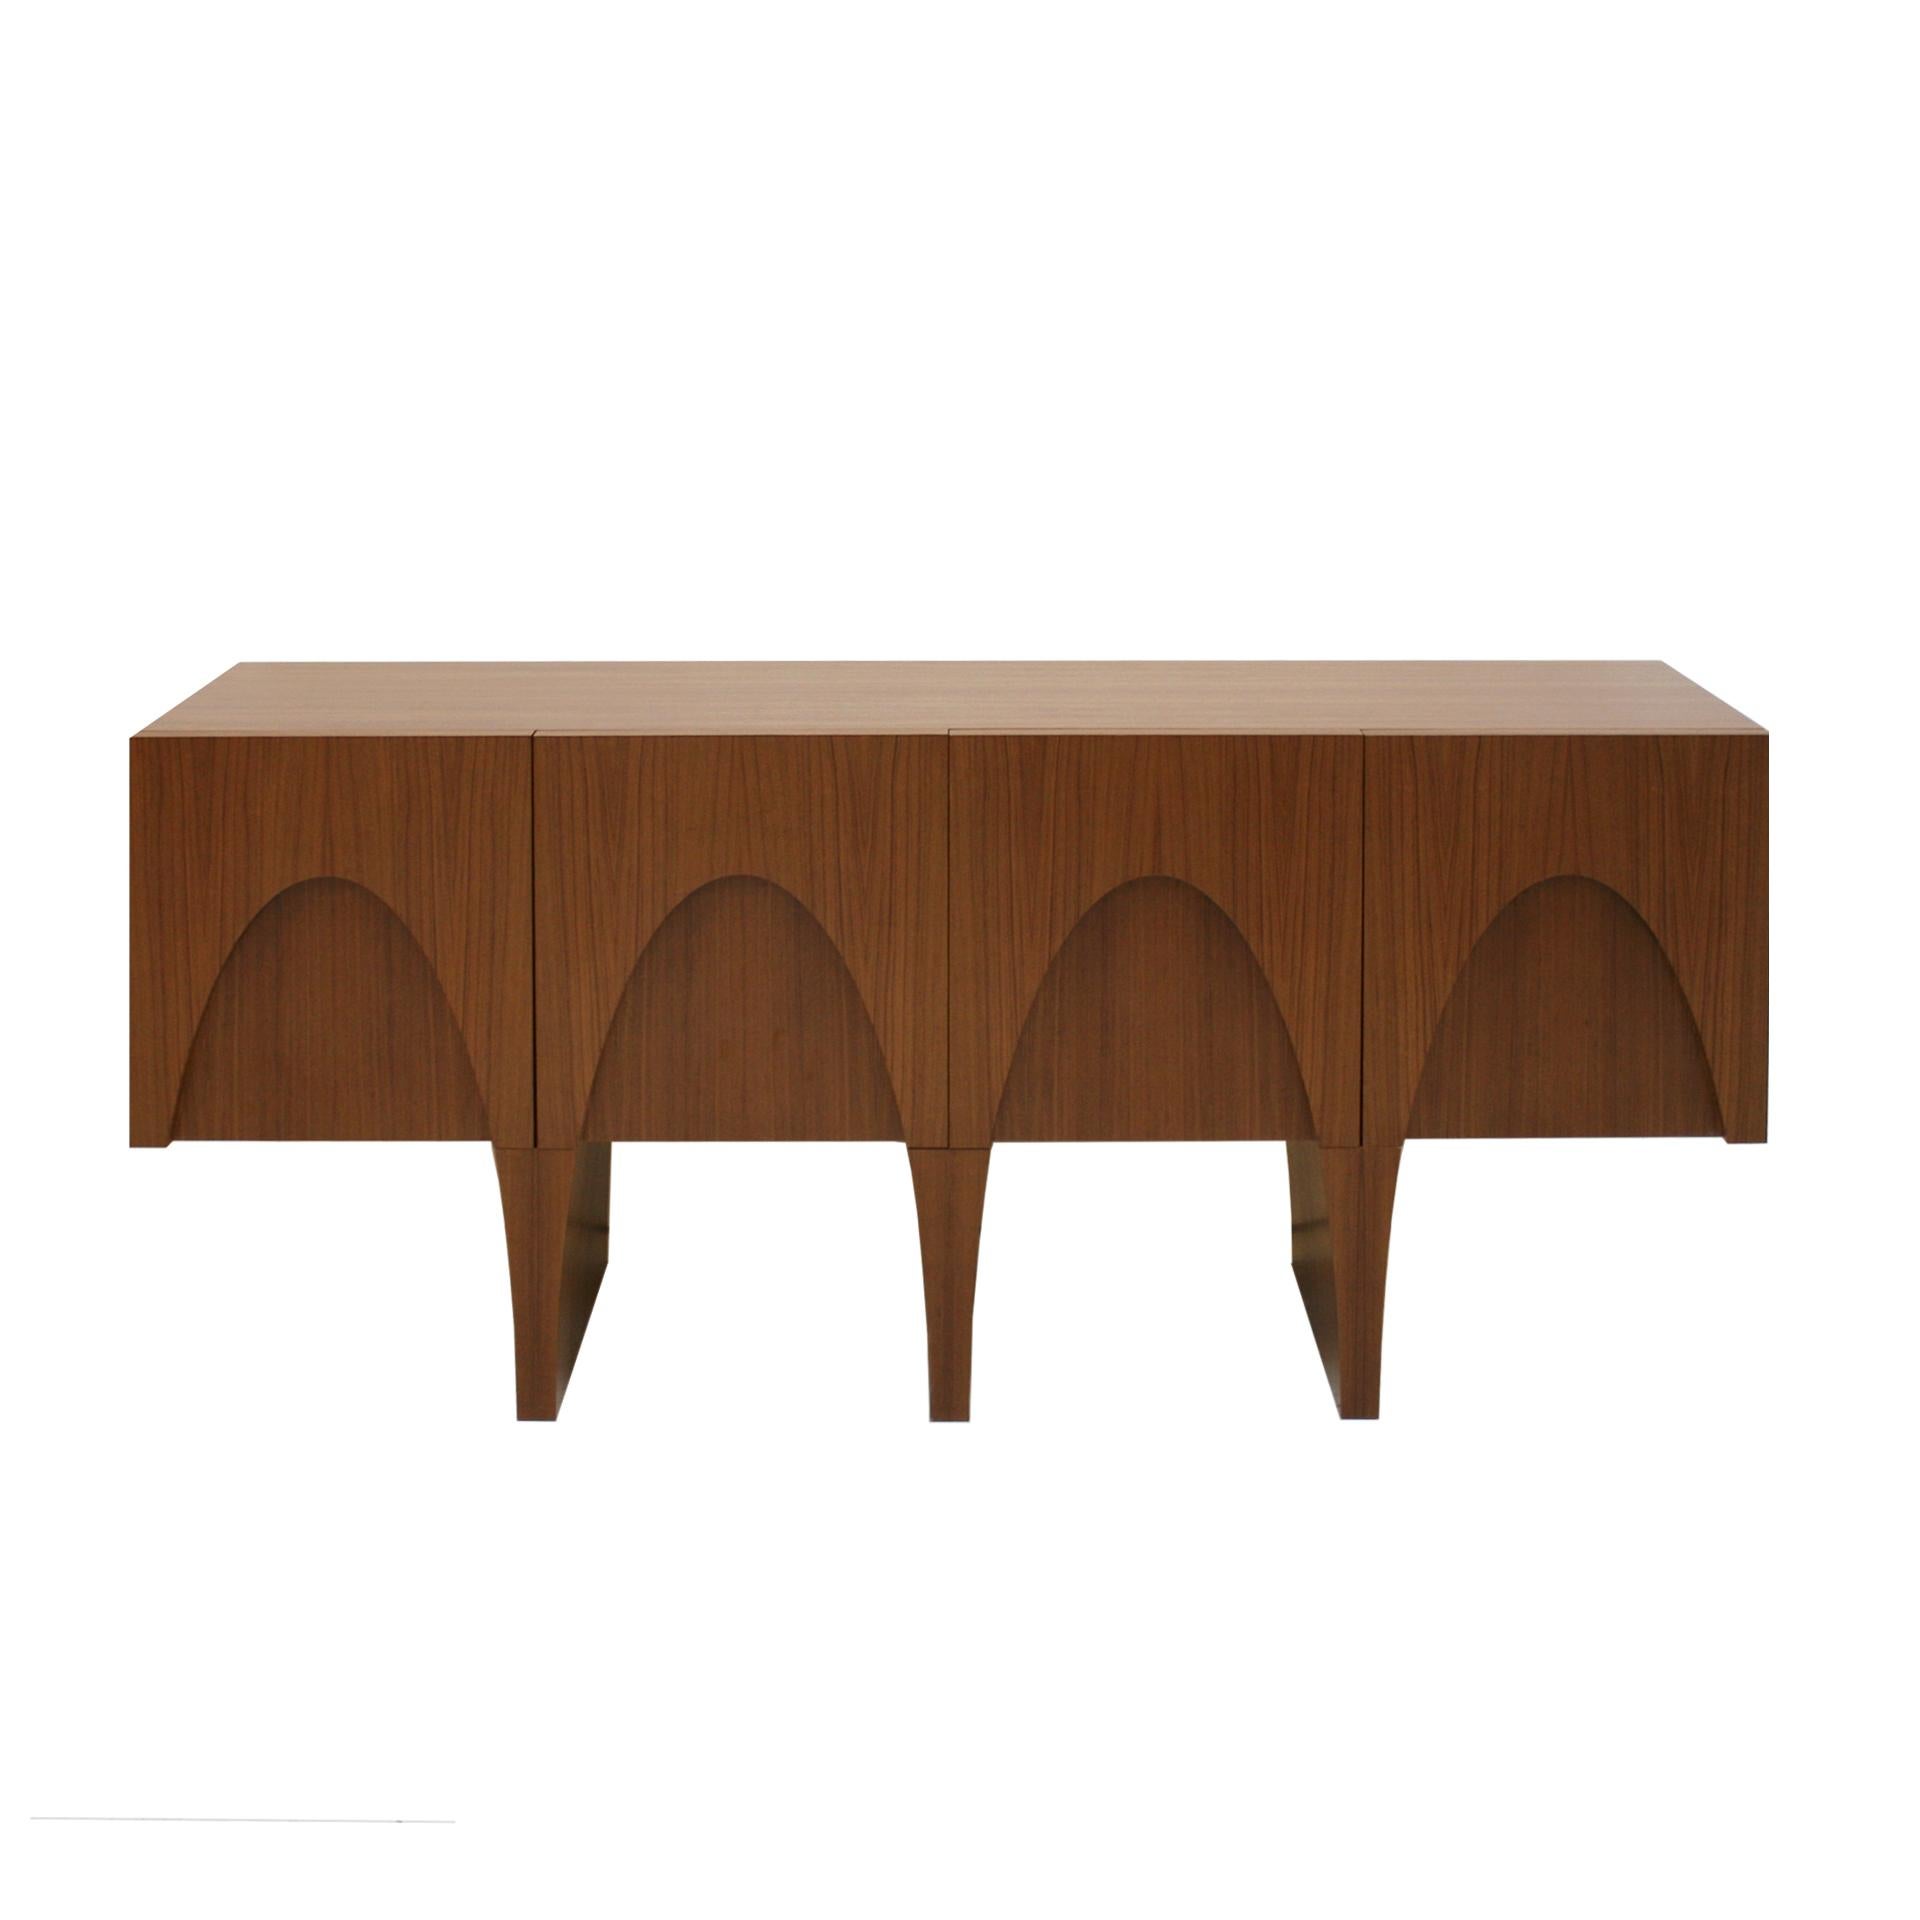 Wooden contemporary sideboard made of teak wood and interior in lemongrass wood. Composed of three sculptural legs and four folding doors.

Our main target is customer satisfaction, so we include in the price for this item professional and custom